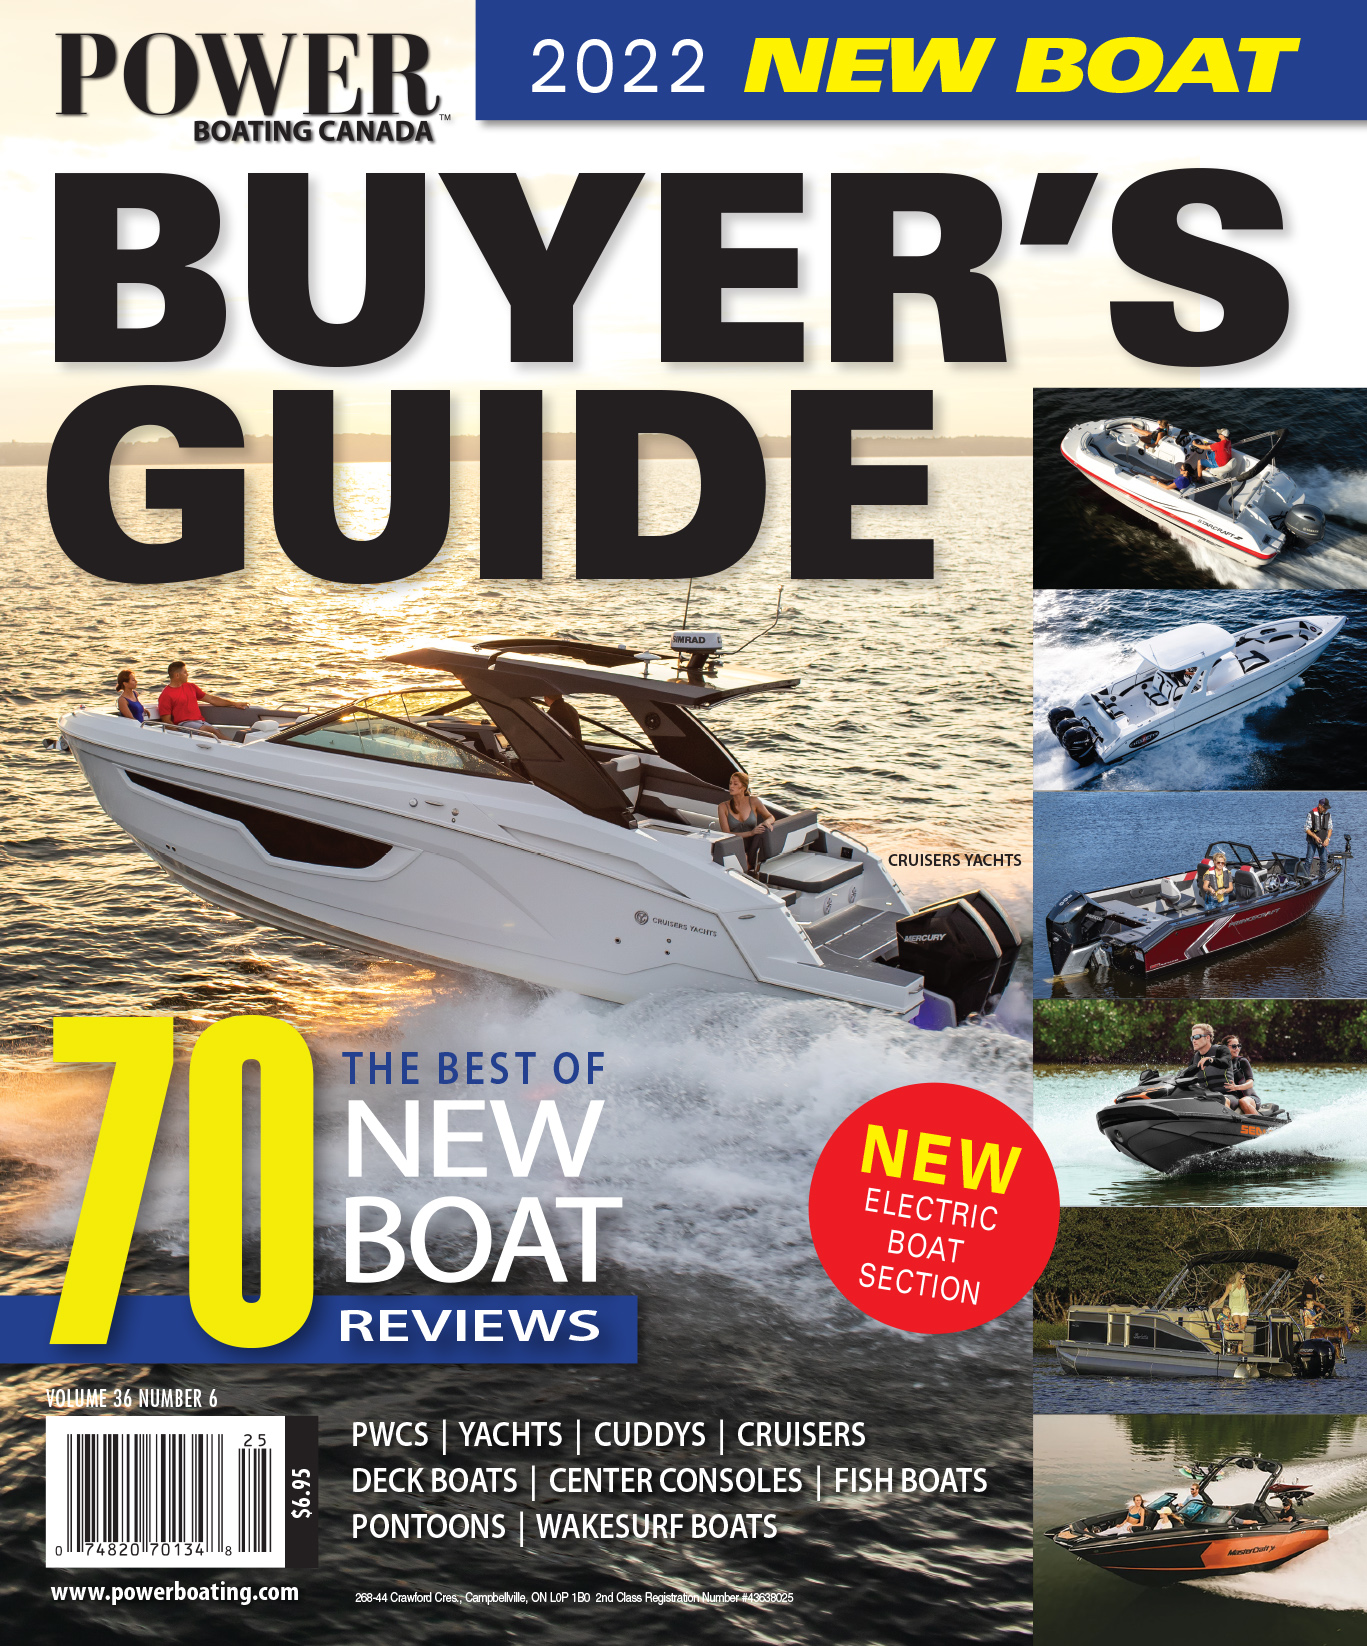 New Boat Buyer's Guide